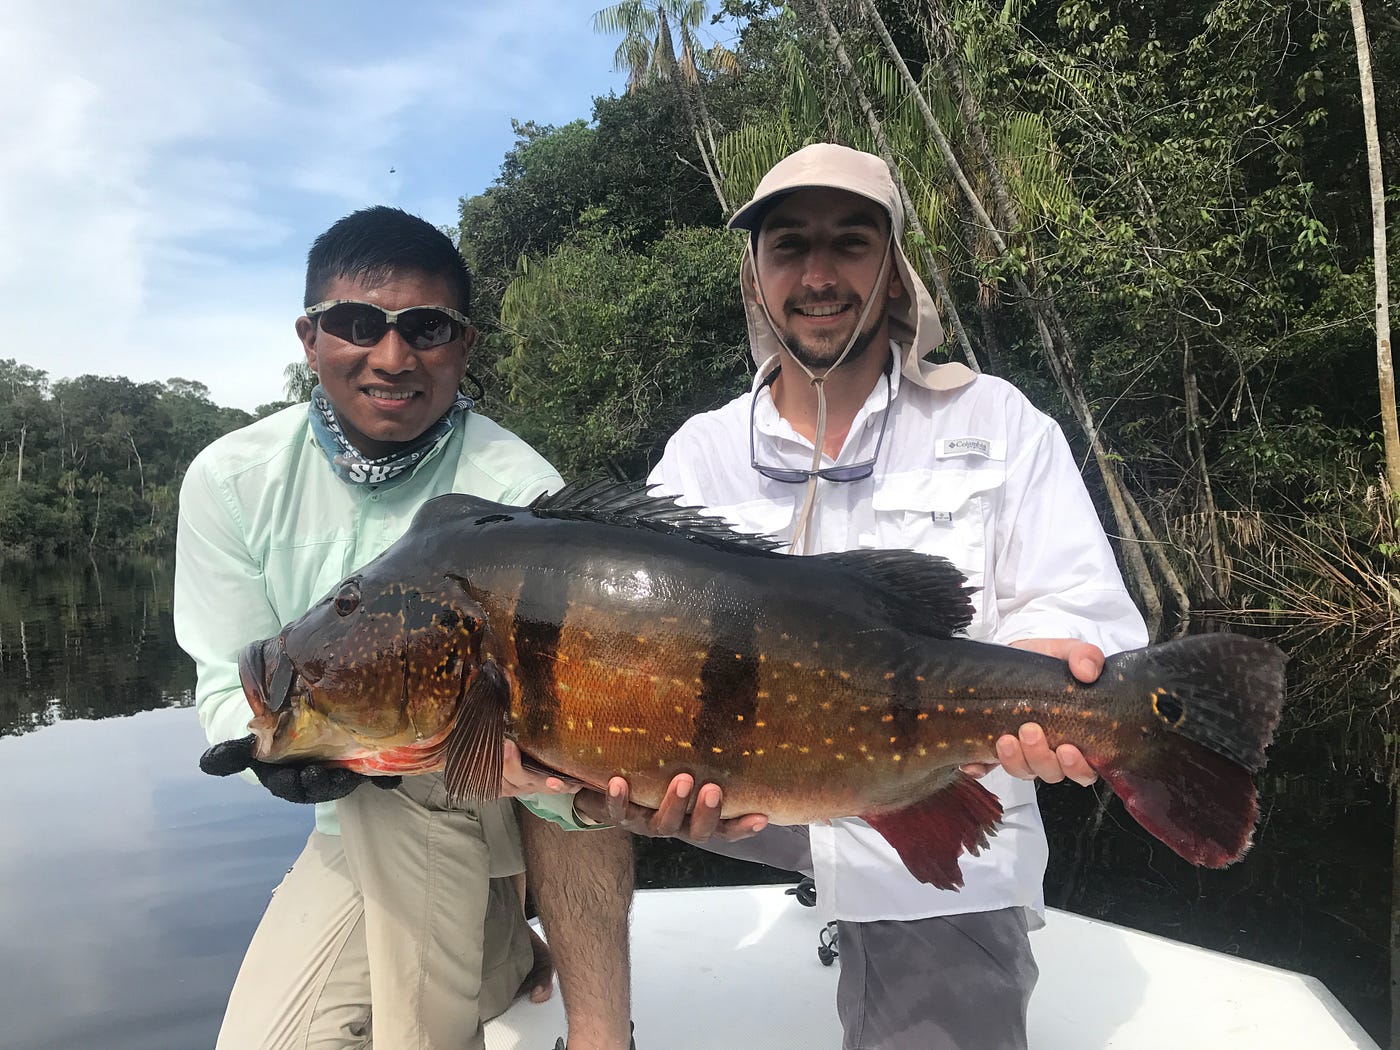 Indigenous sport fishing submits world record for speckled peacock bass, by Instituto Socioambiental, Social Environmental Stories